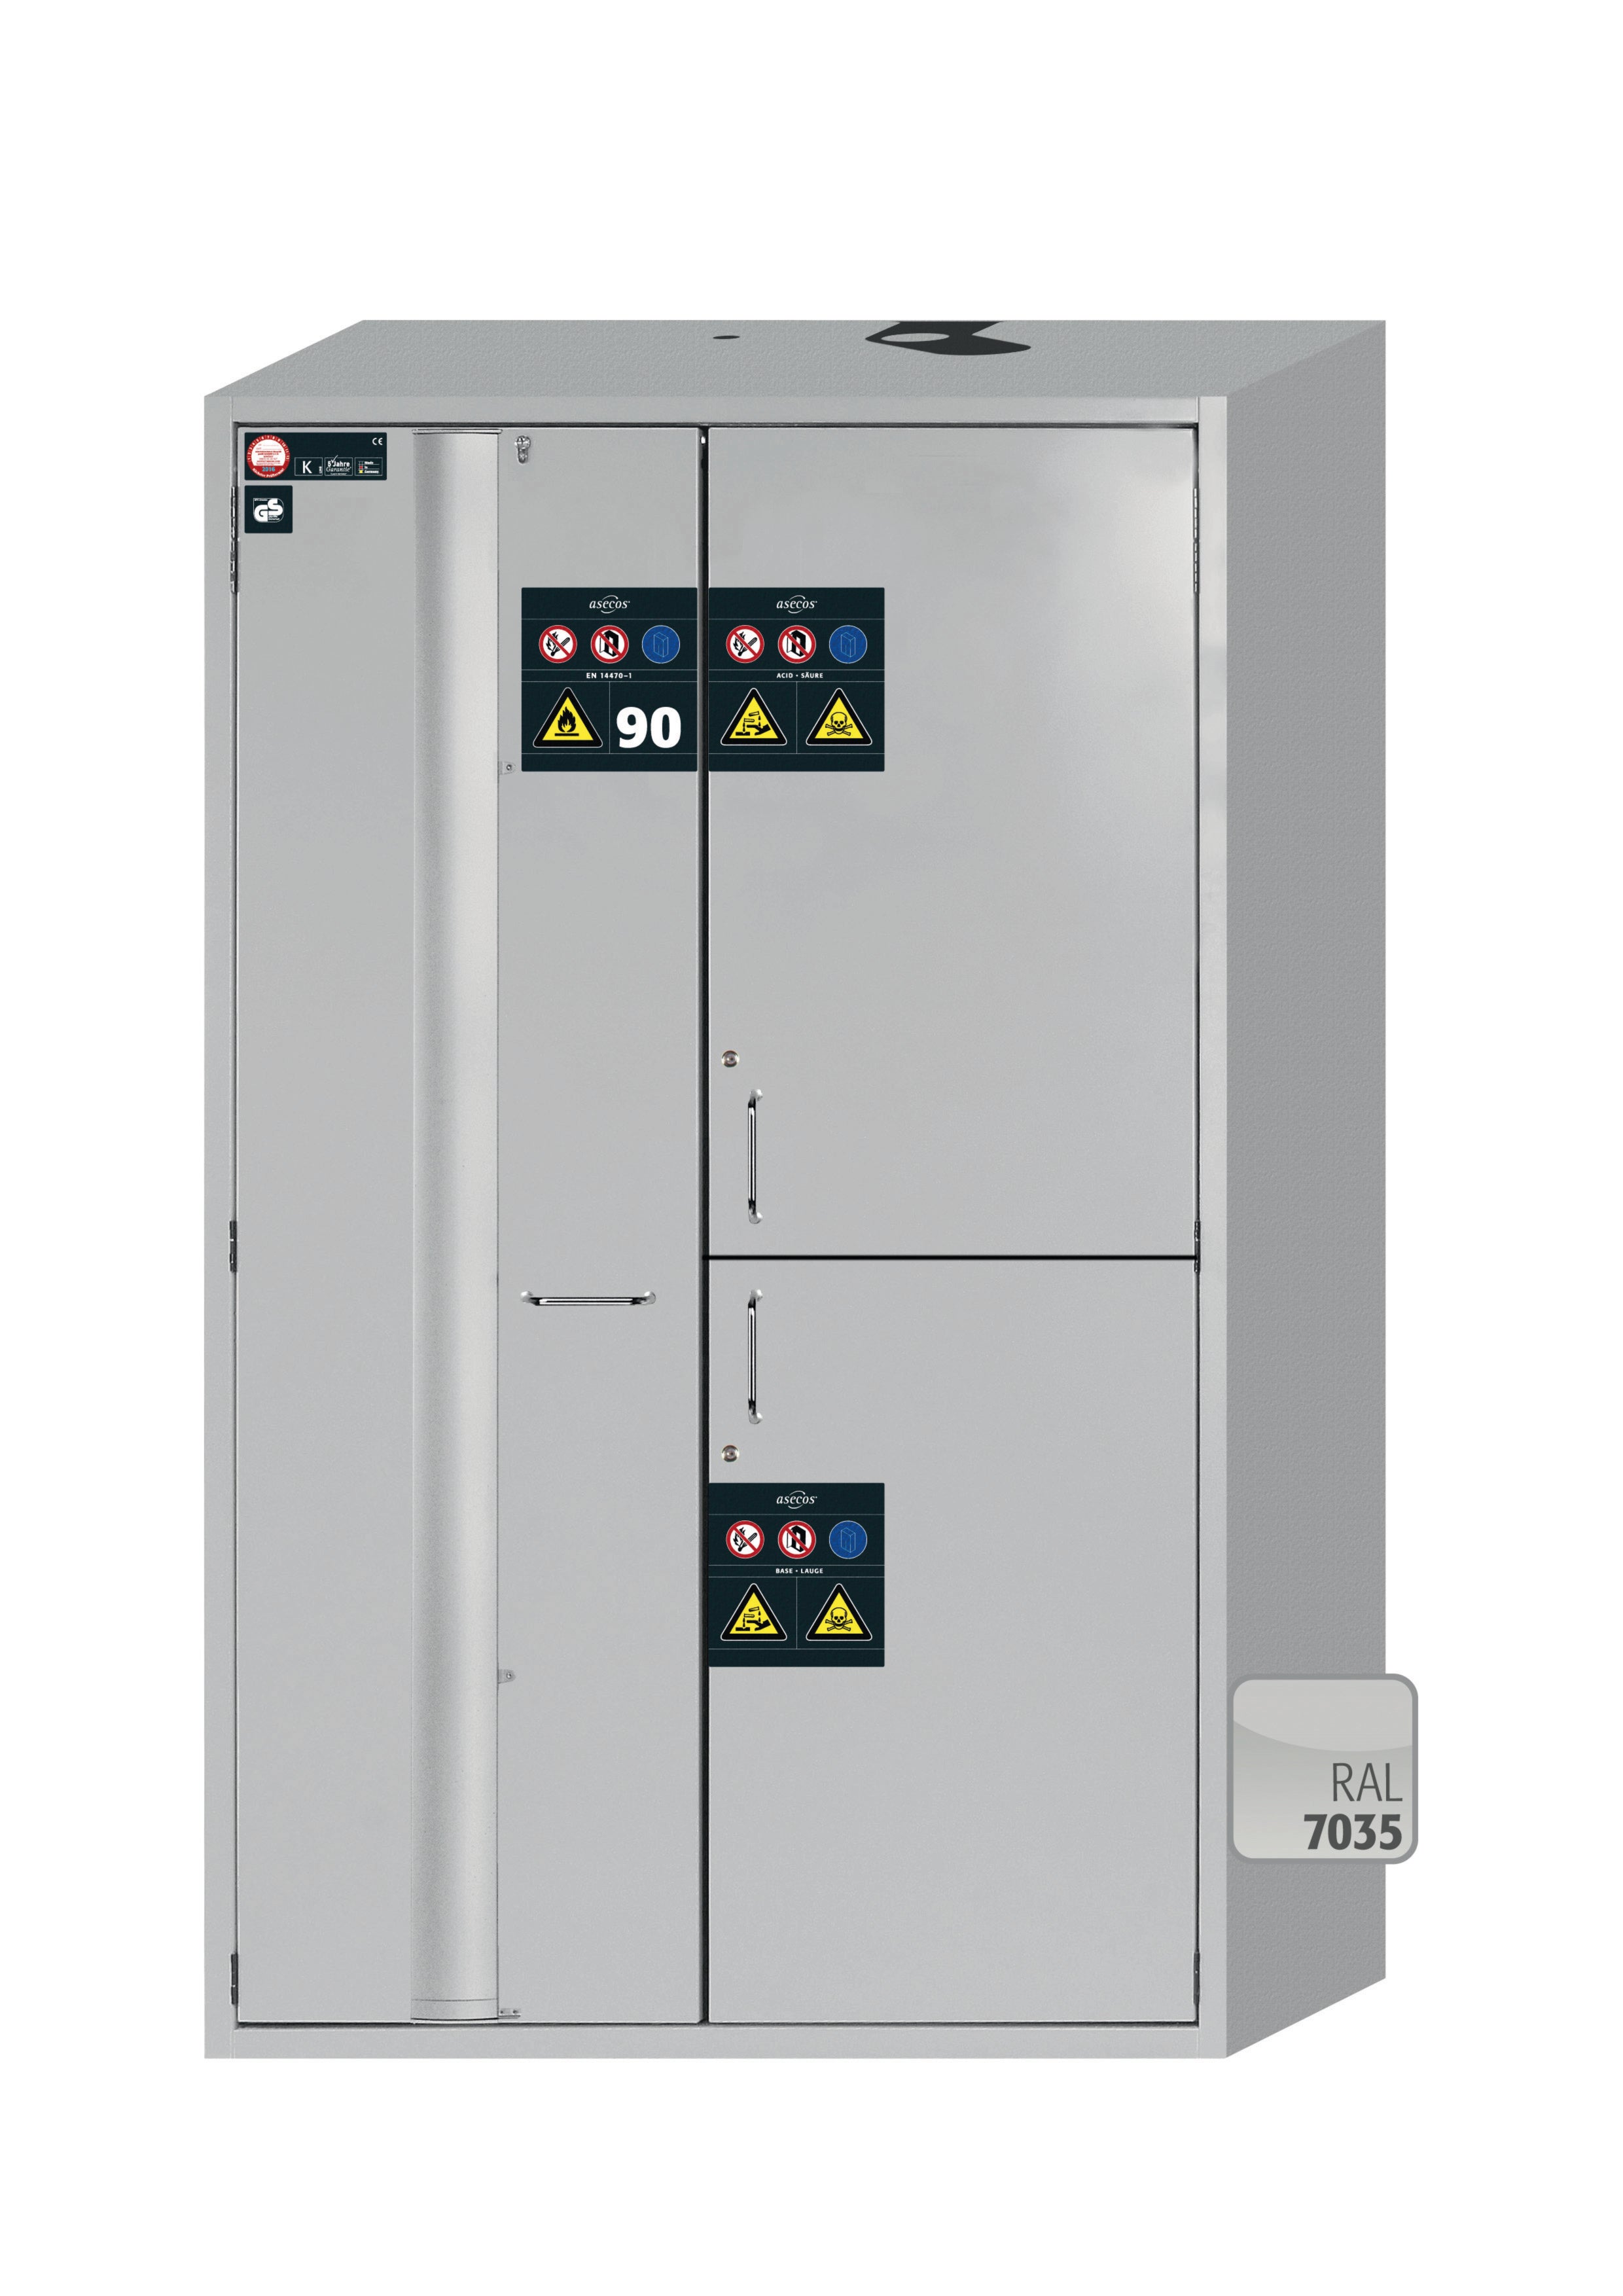 Type 90 combination safety cabinet K-PHOENIX Vol.2-90 model K90.196.120.MC.FWAC in light gray RAL 7035 with 2x standard shelves (sheet steel)